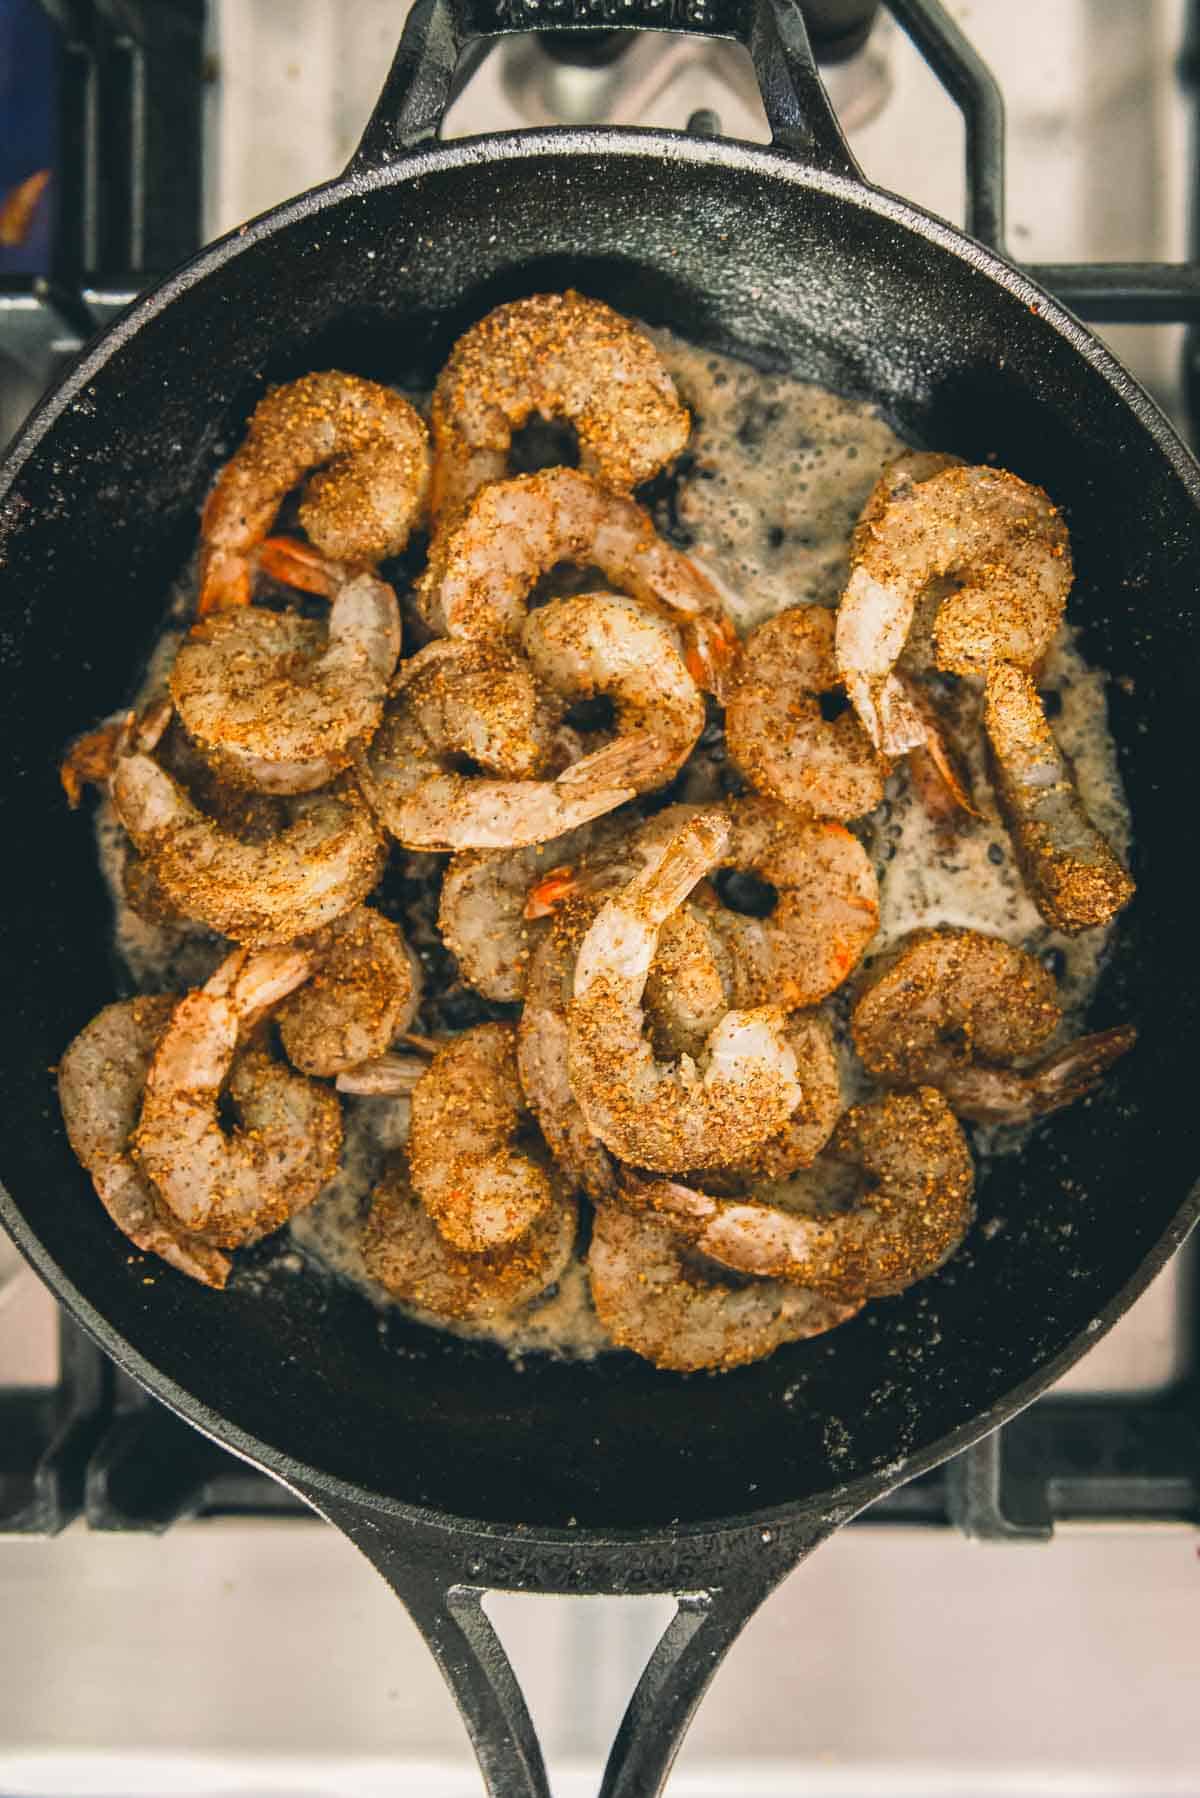 Shrimp added to the pan with spices to cook.